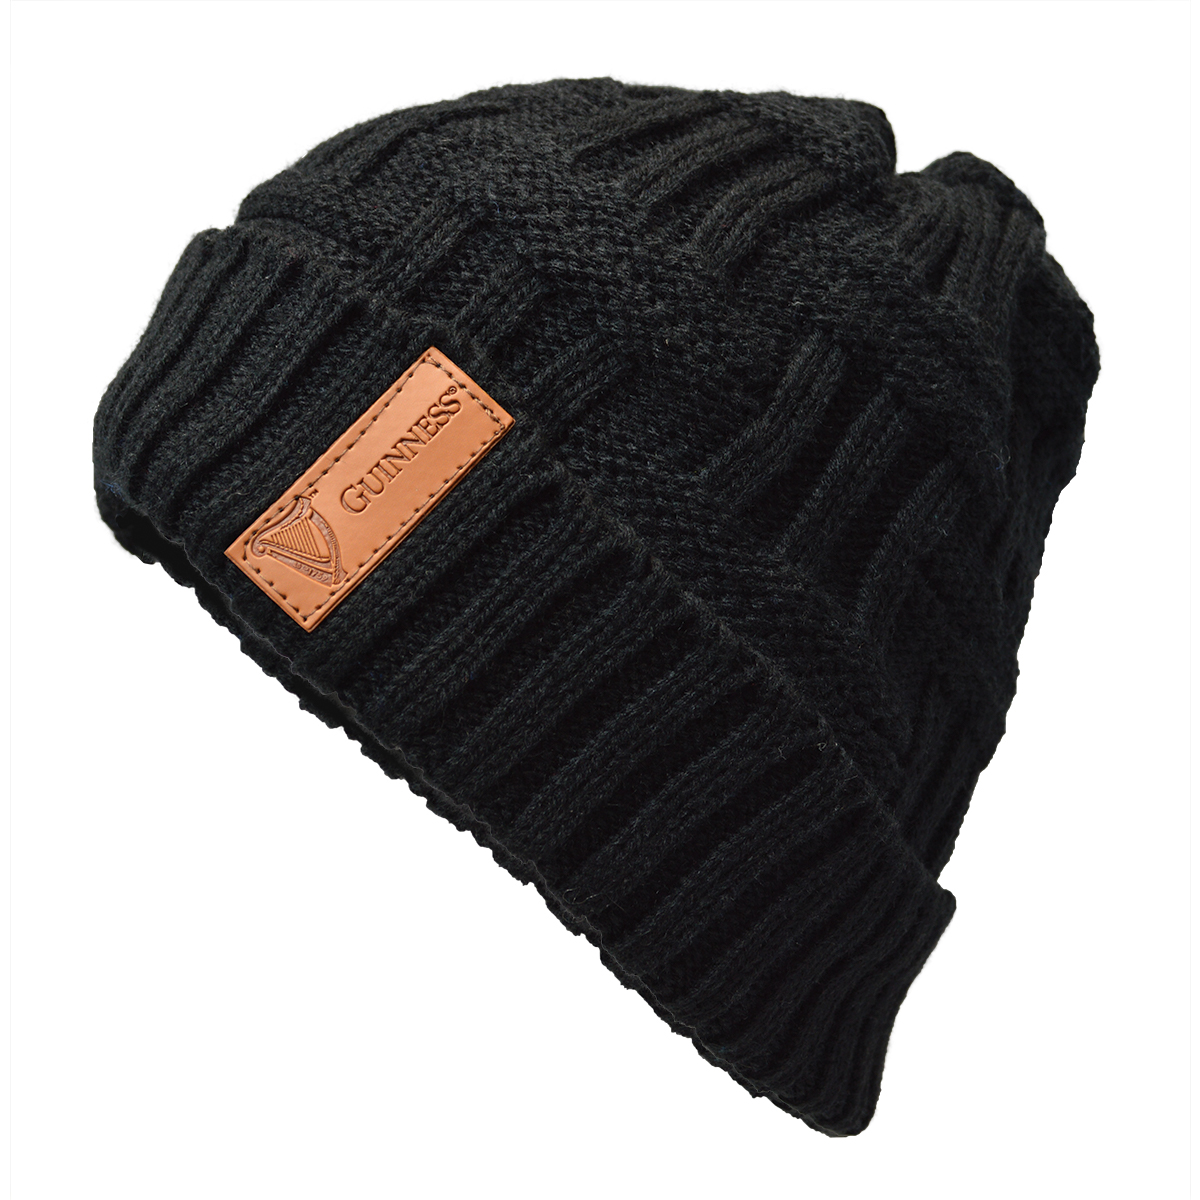 Product image for Irish Hats | Guinness Black Beanie with Leather Patch